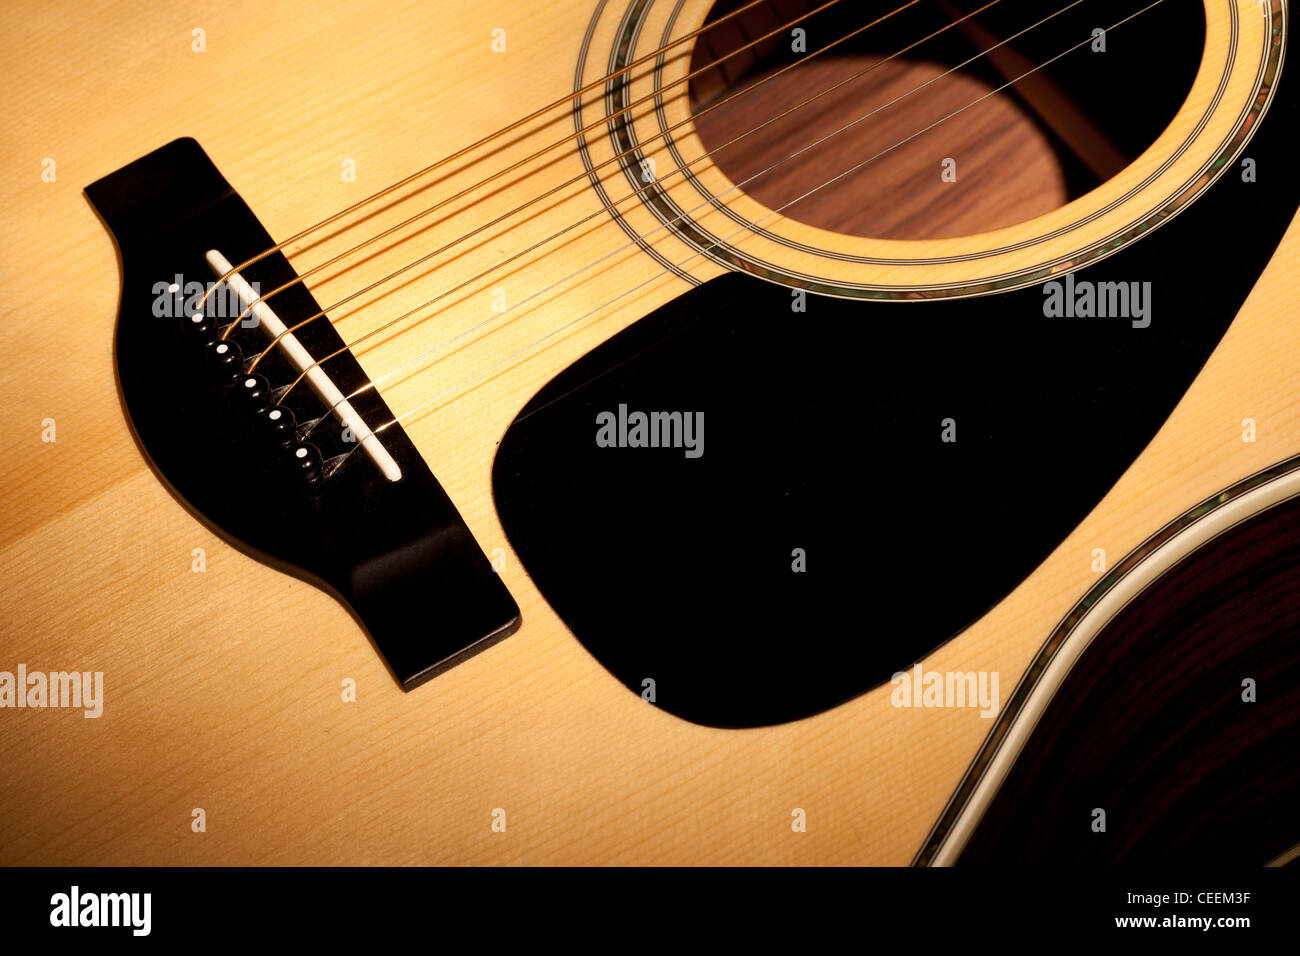 Acoustic guitar detail showing bridge, fingerboard, strings and sound hole. Stock Photo